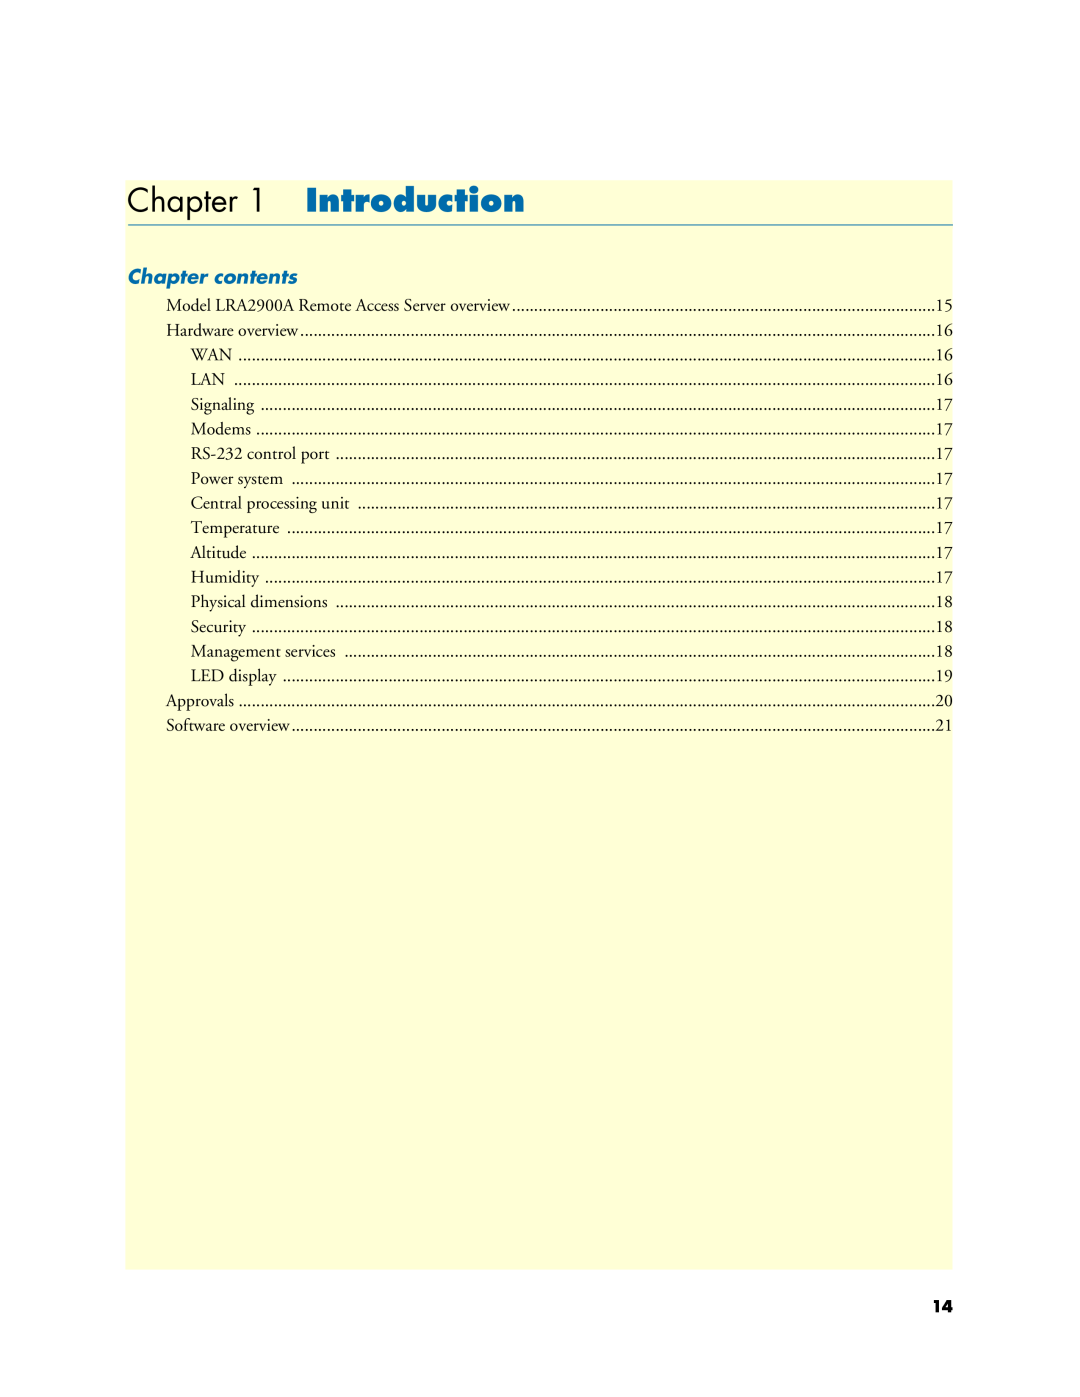 Black Box LRA2900A manual Introduction, Chapter contents 